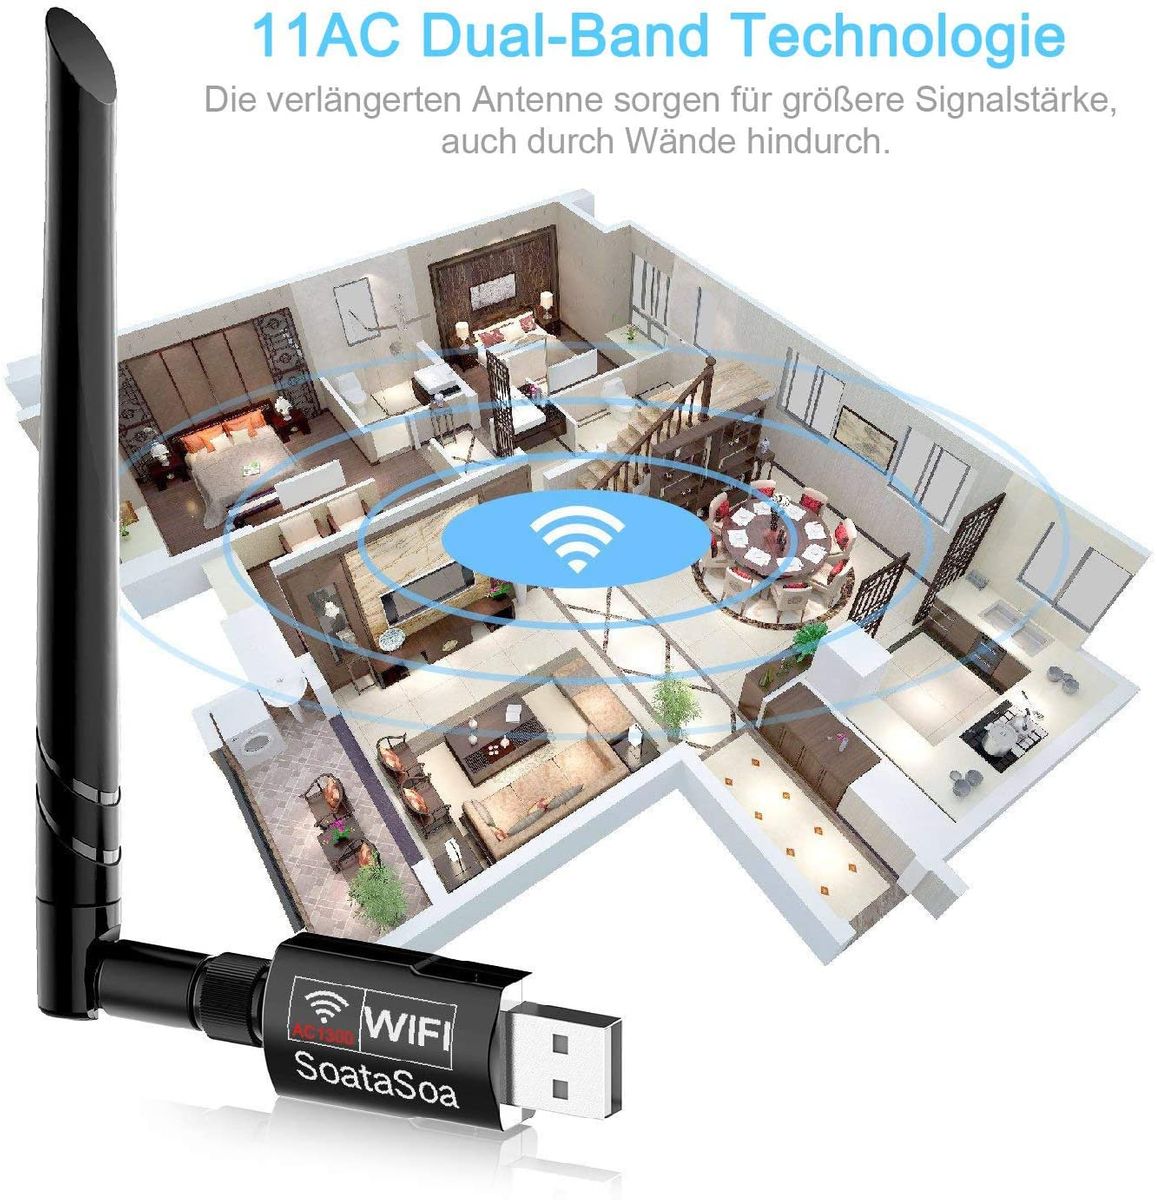 SoataSoa Wlan Adapter 1200Mbit / s (5.8G / 867Mbps + 2.4G / 300Mbps), WiFi Adapter USB 3.0 AC Dual-band Wireless Adapter, USB WiFi Adapter